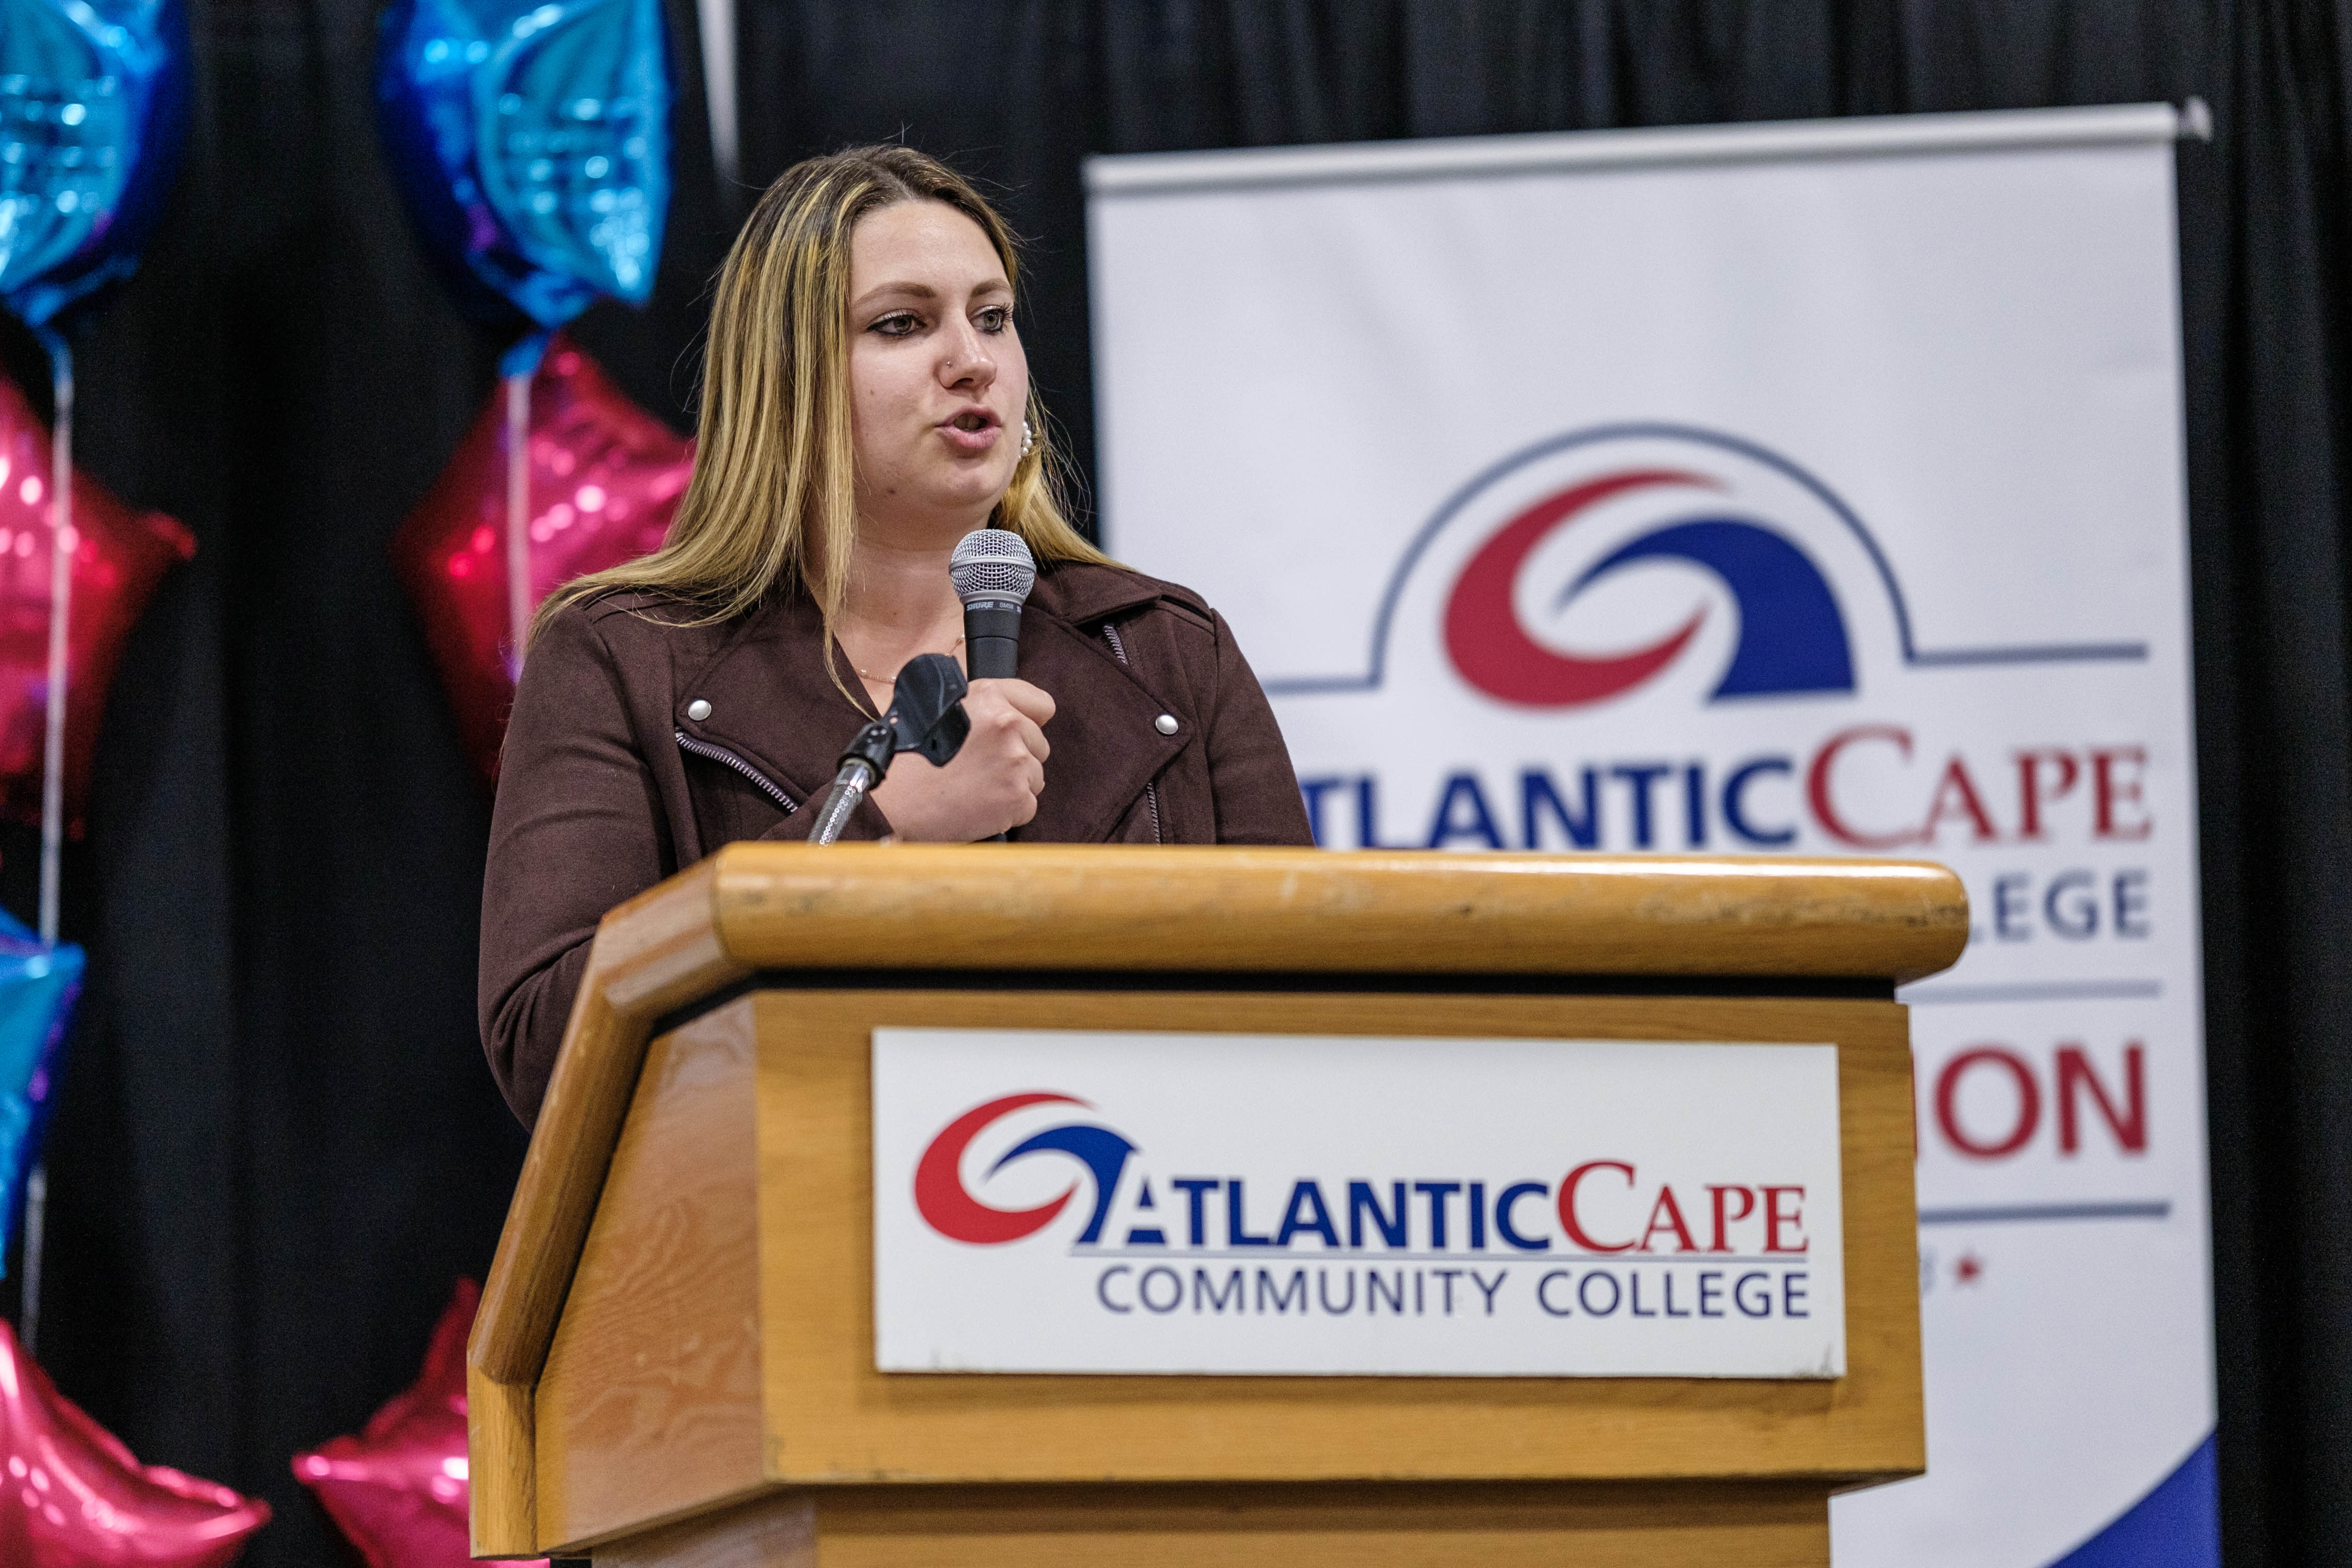 Atlantic Cape student Jessica White speaks to the audience